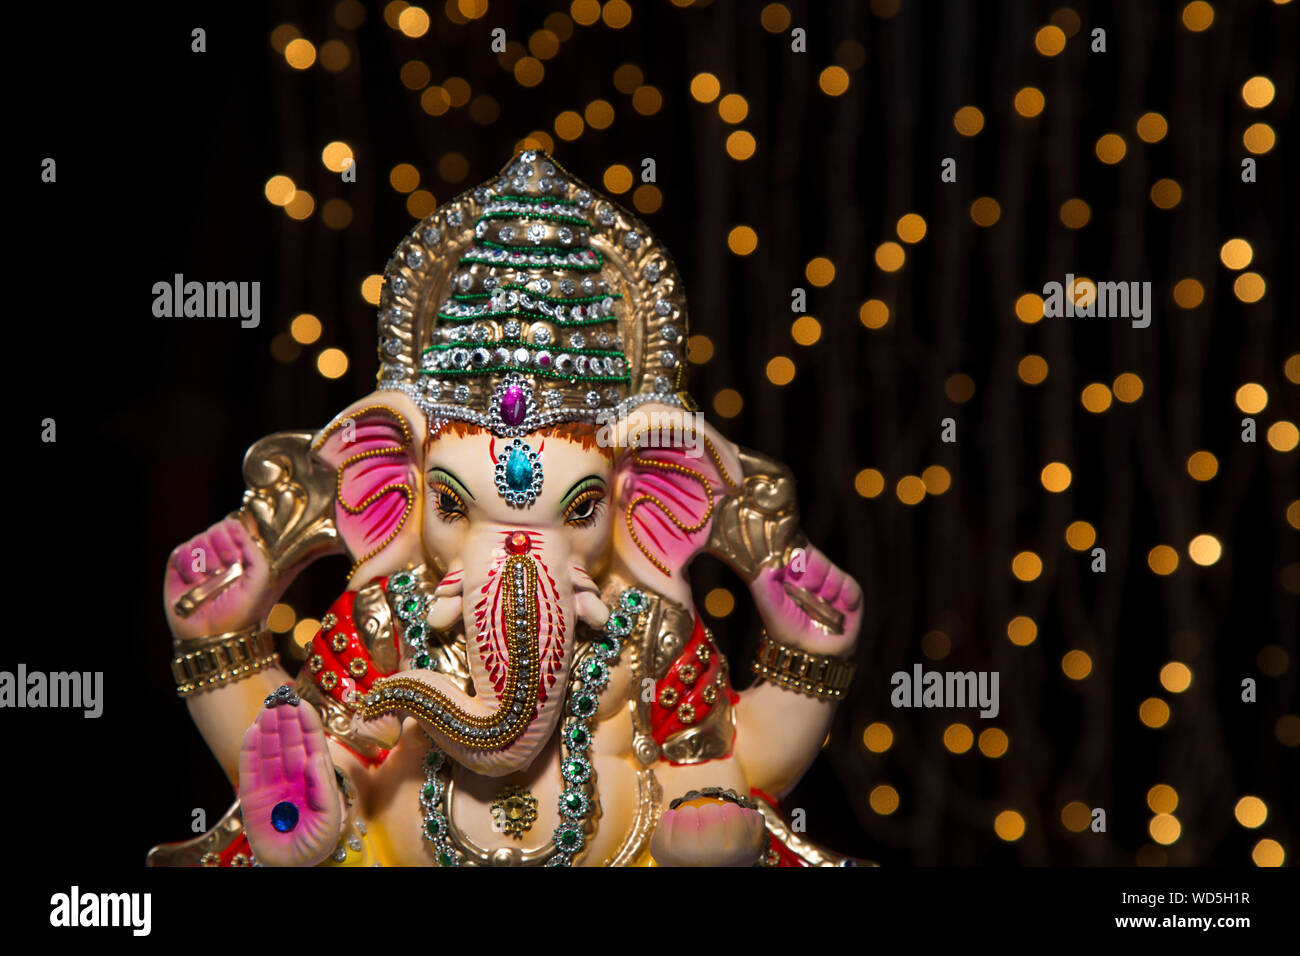 ganesh idol with lights in background Stock Photo